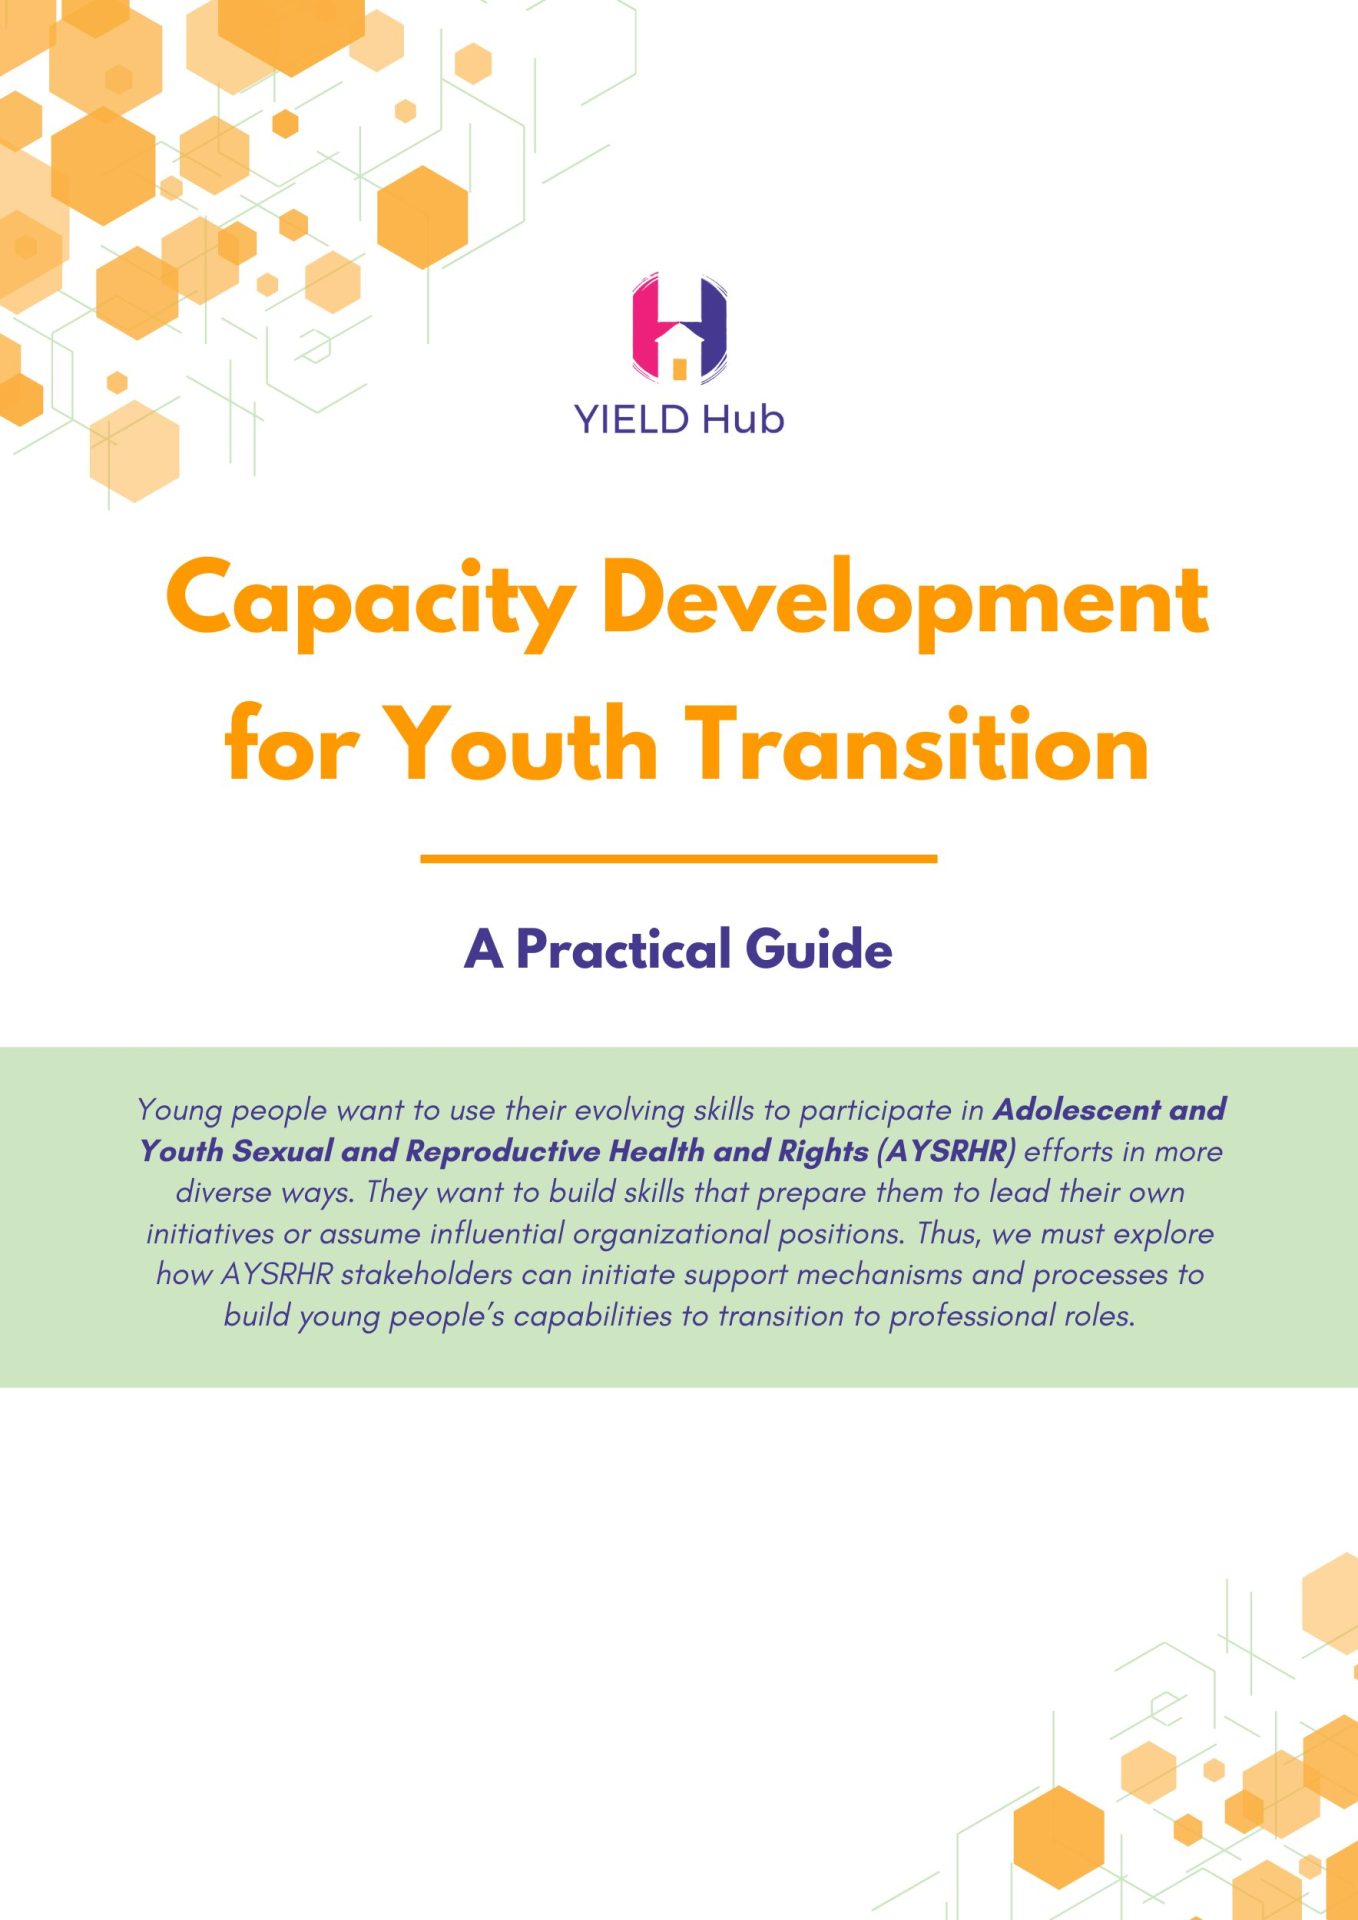 A Practical Guide on Capacity Building for Youth Transition